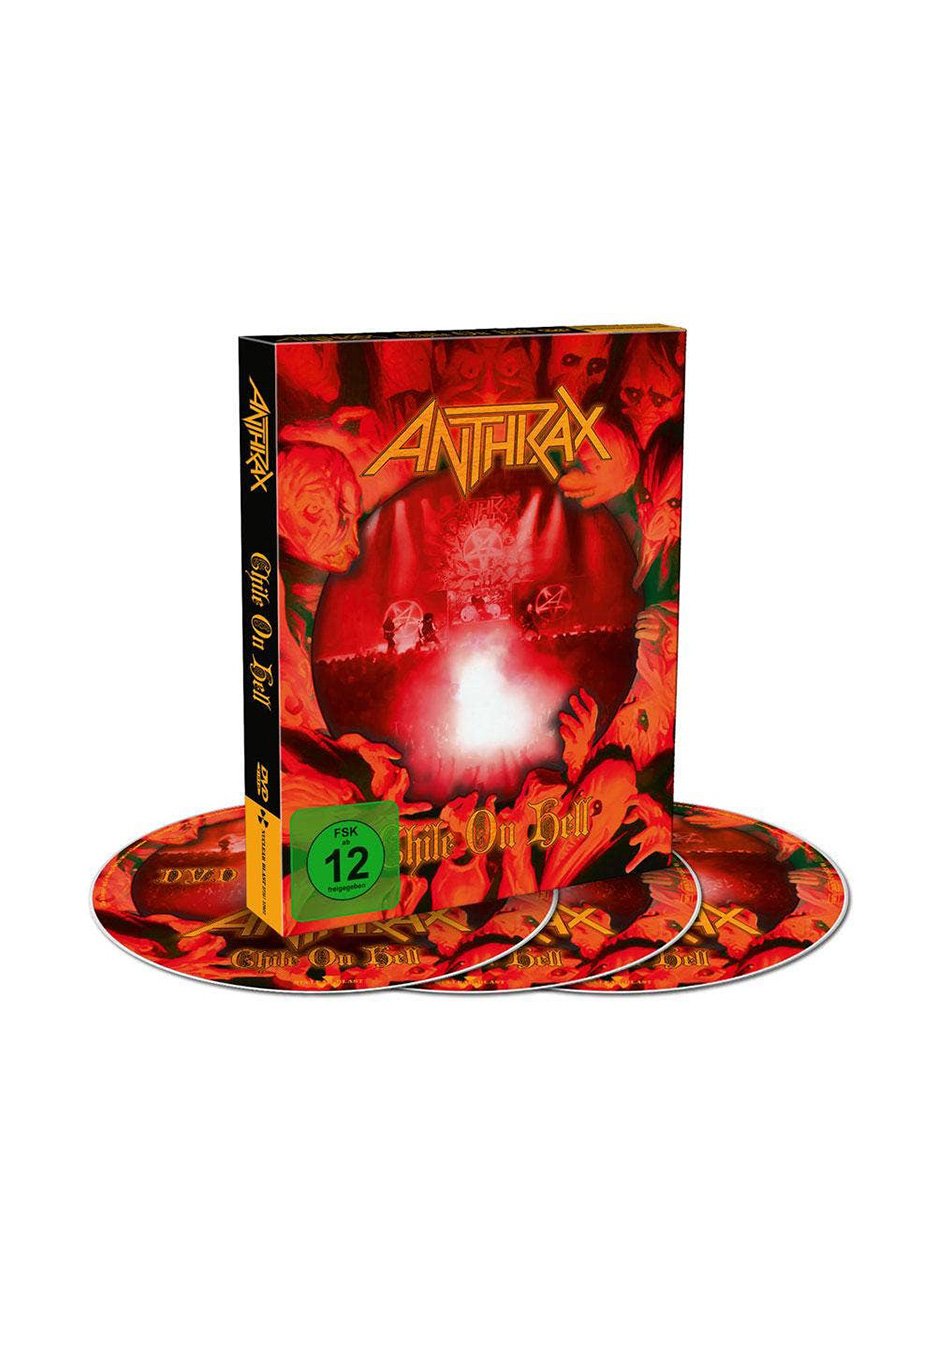 Anthrax - Chile On Hell - DVD + 2 CD